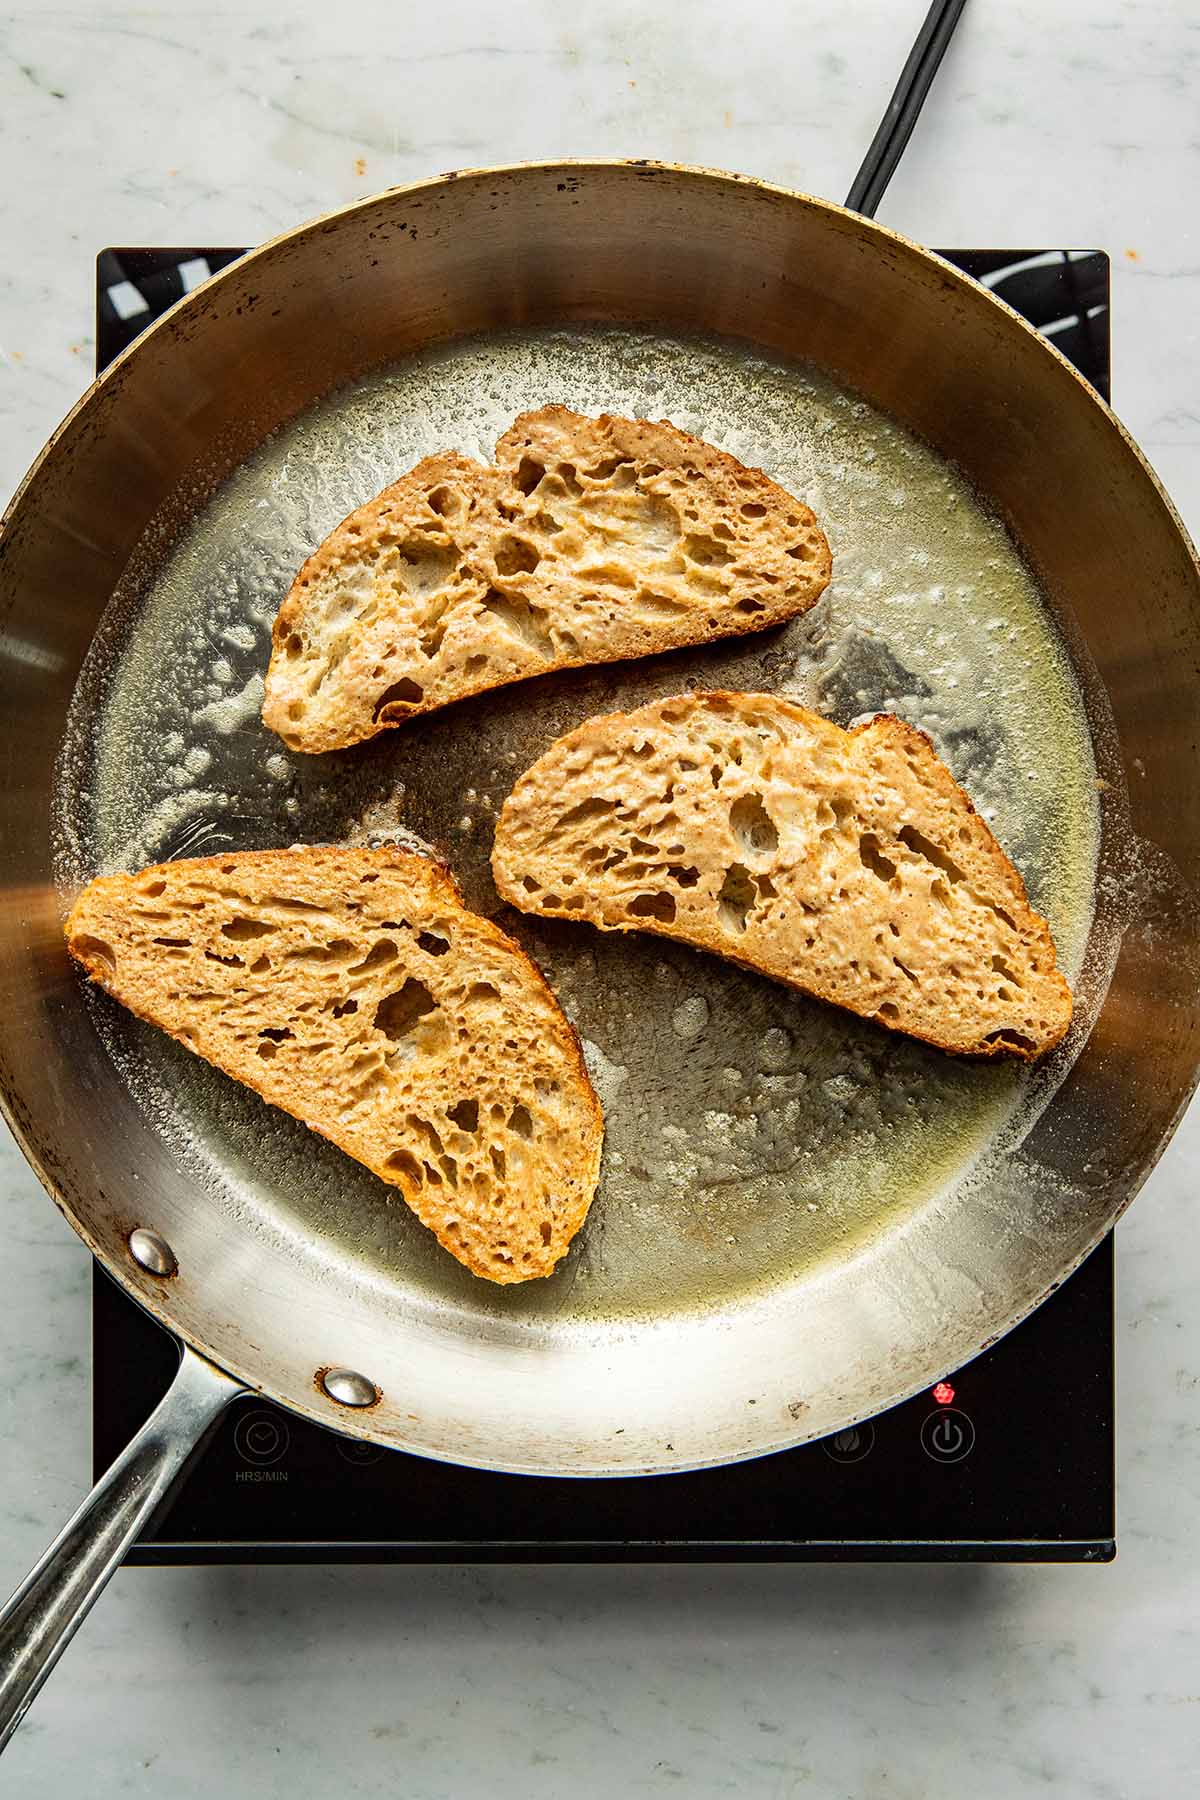 Three slices of bread in a buttered frying pan.